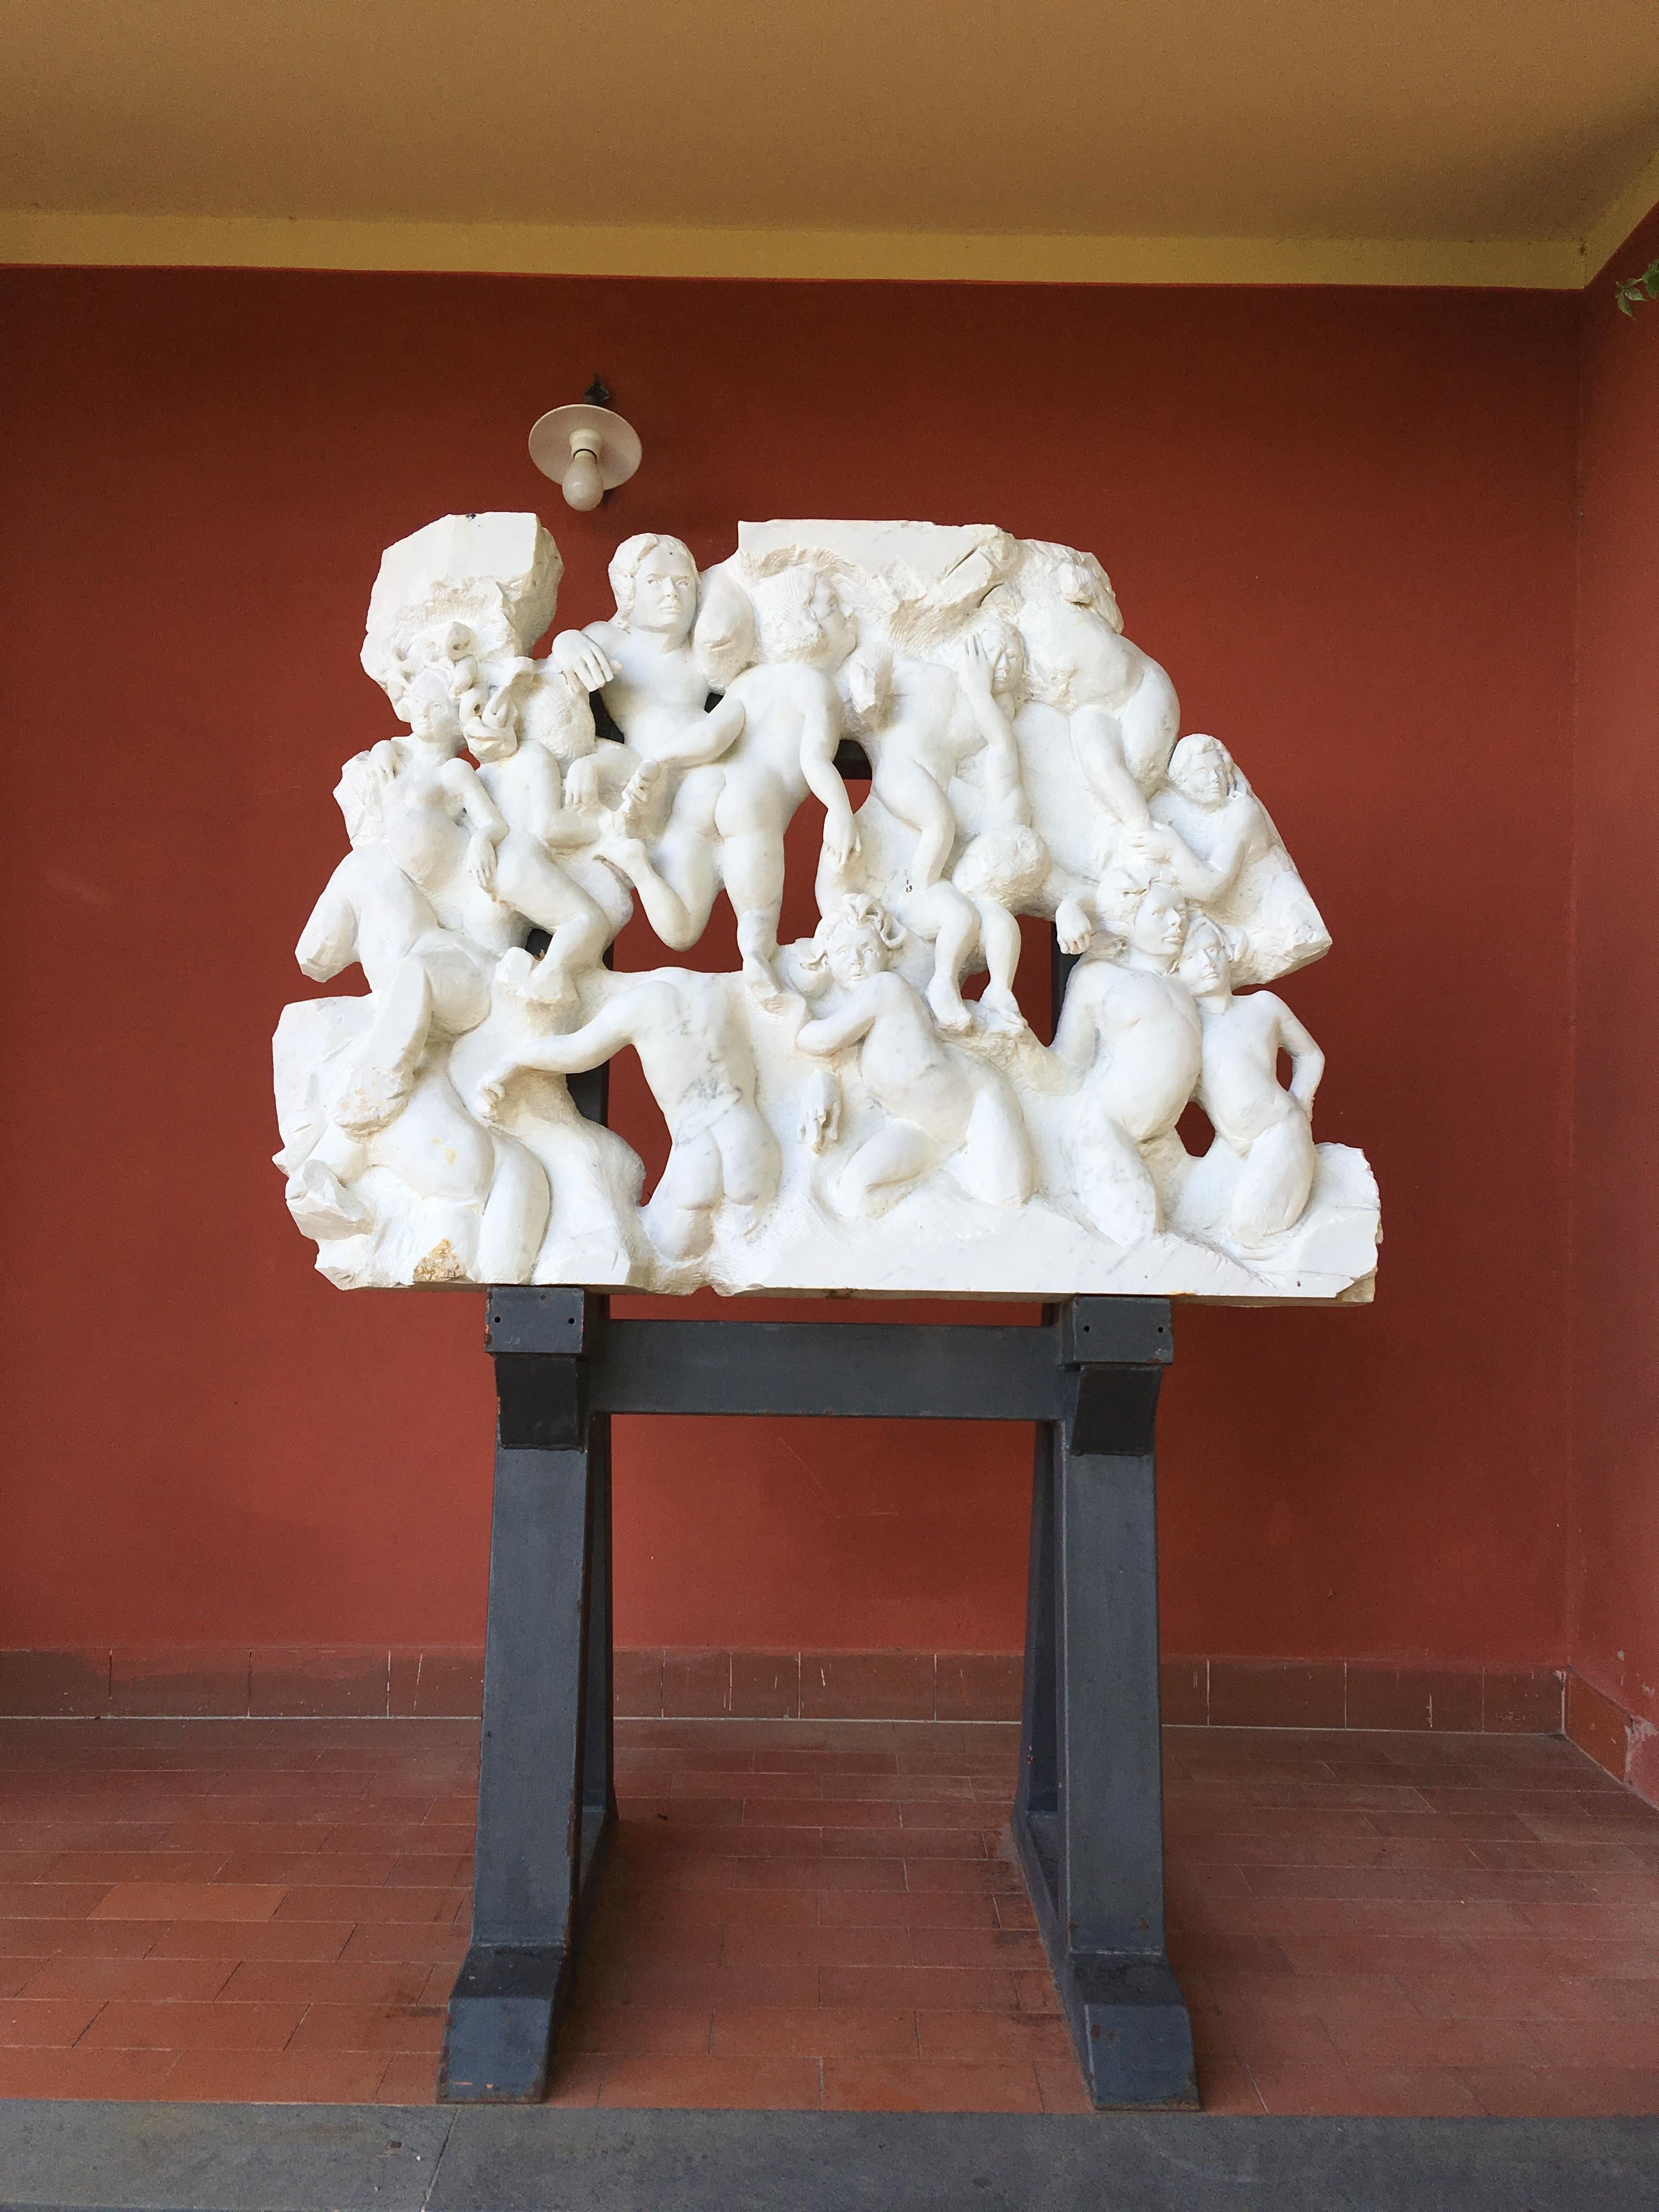 DANZA (Dance) by Lorenzo Vignoli
striking hand carved Carrara marble frieze relief by contemporary Italian sculptor Lorenzo Vignoli, incorporating mesmerizing classical references and contemporary Mediterranean influences

Sculpture dimensions:
39 x